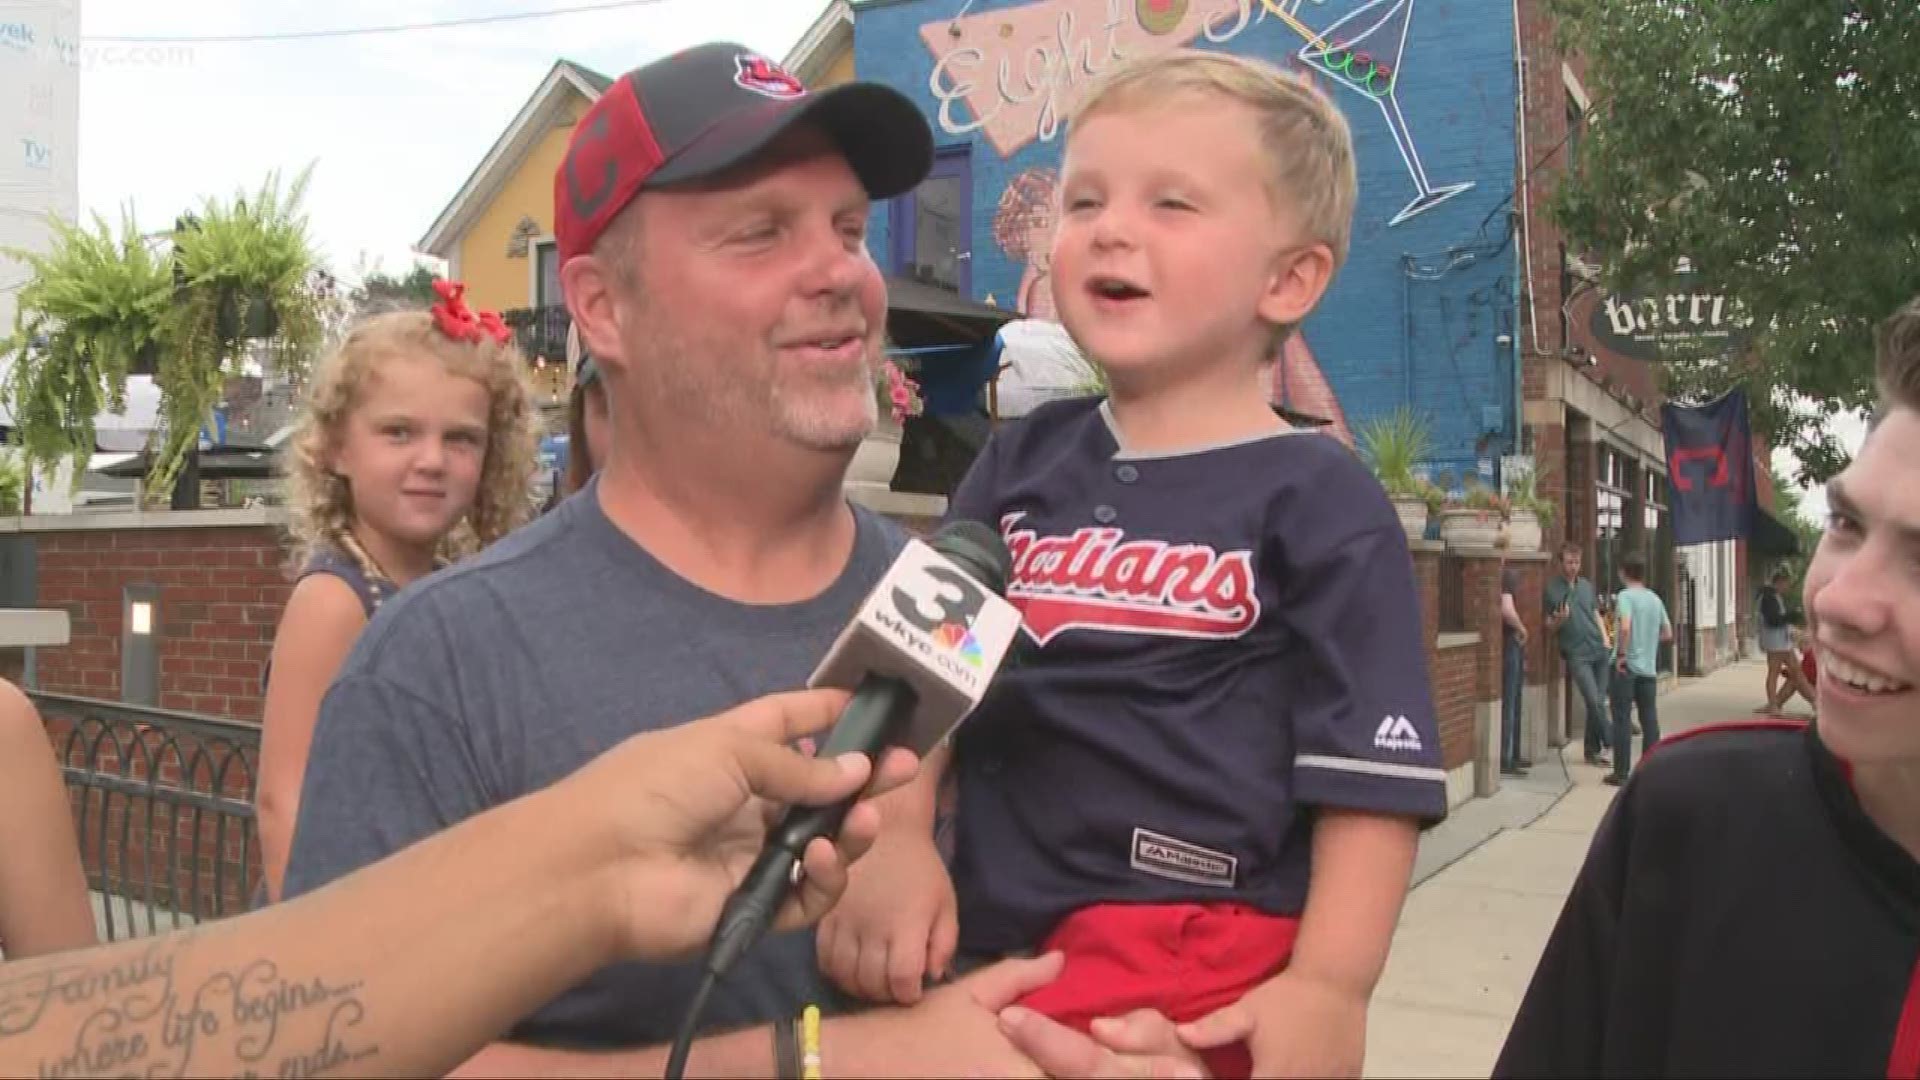 Cancer survivor throws out first pitch at Cleveland Indians game